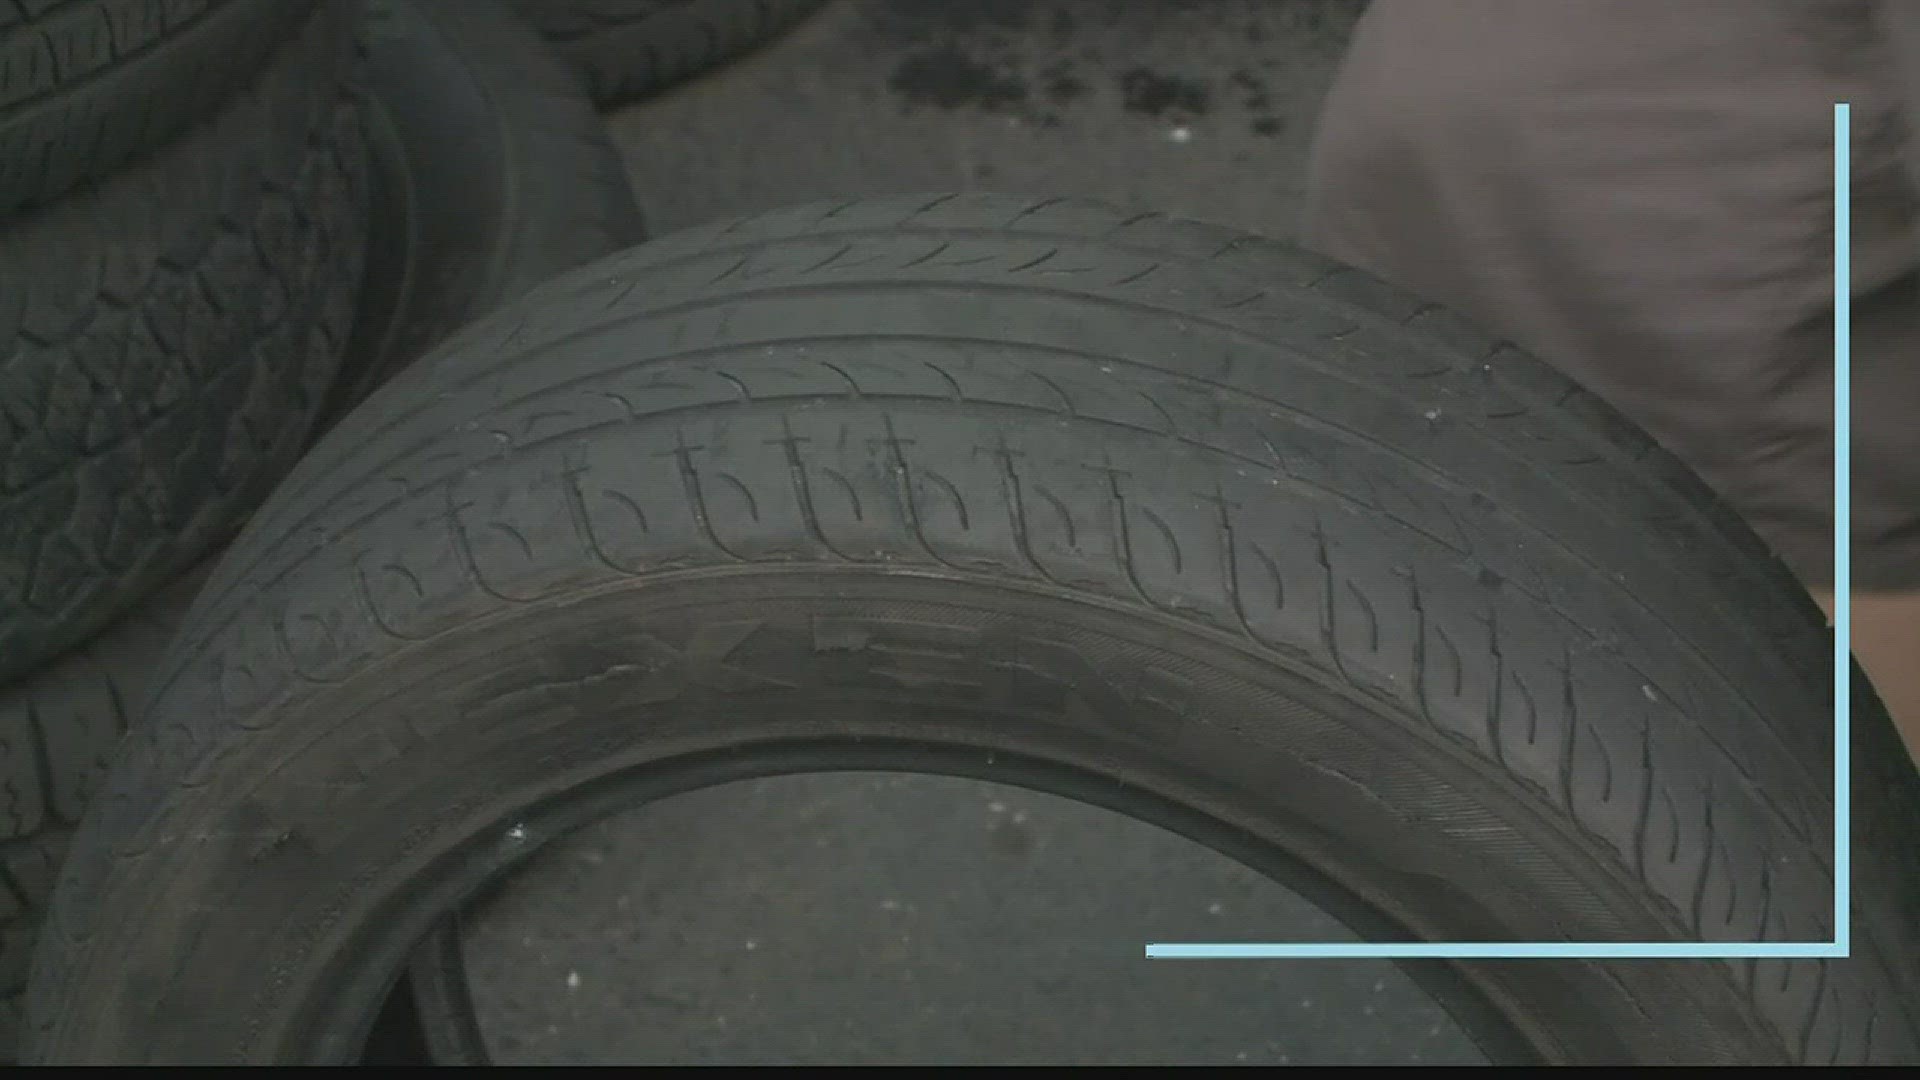 One viewer said that she has seen lots of tire fragments on the roads and wanted to know if the high temps could cause her tires to blow out.